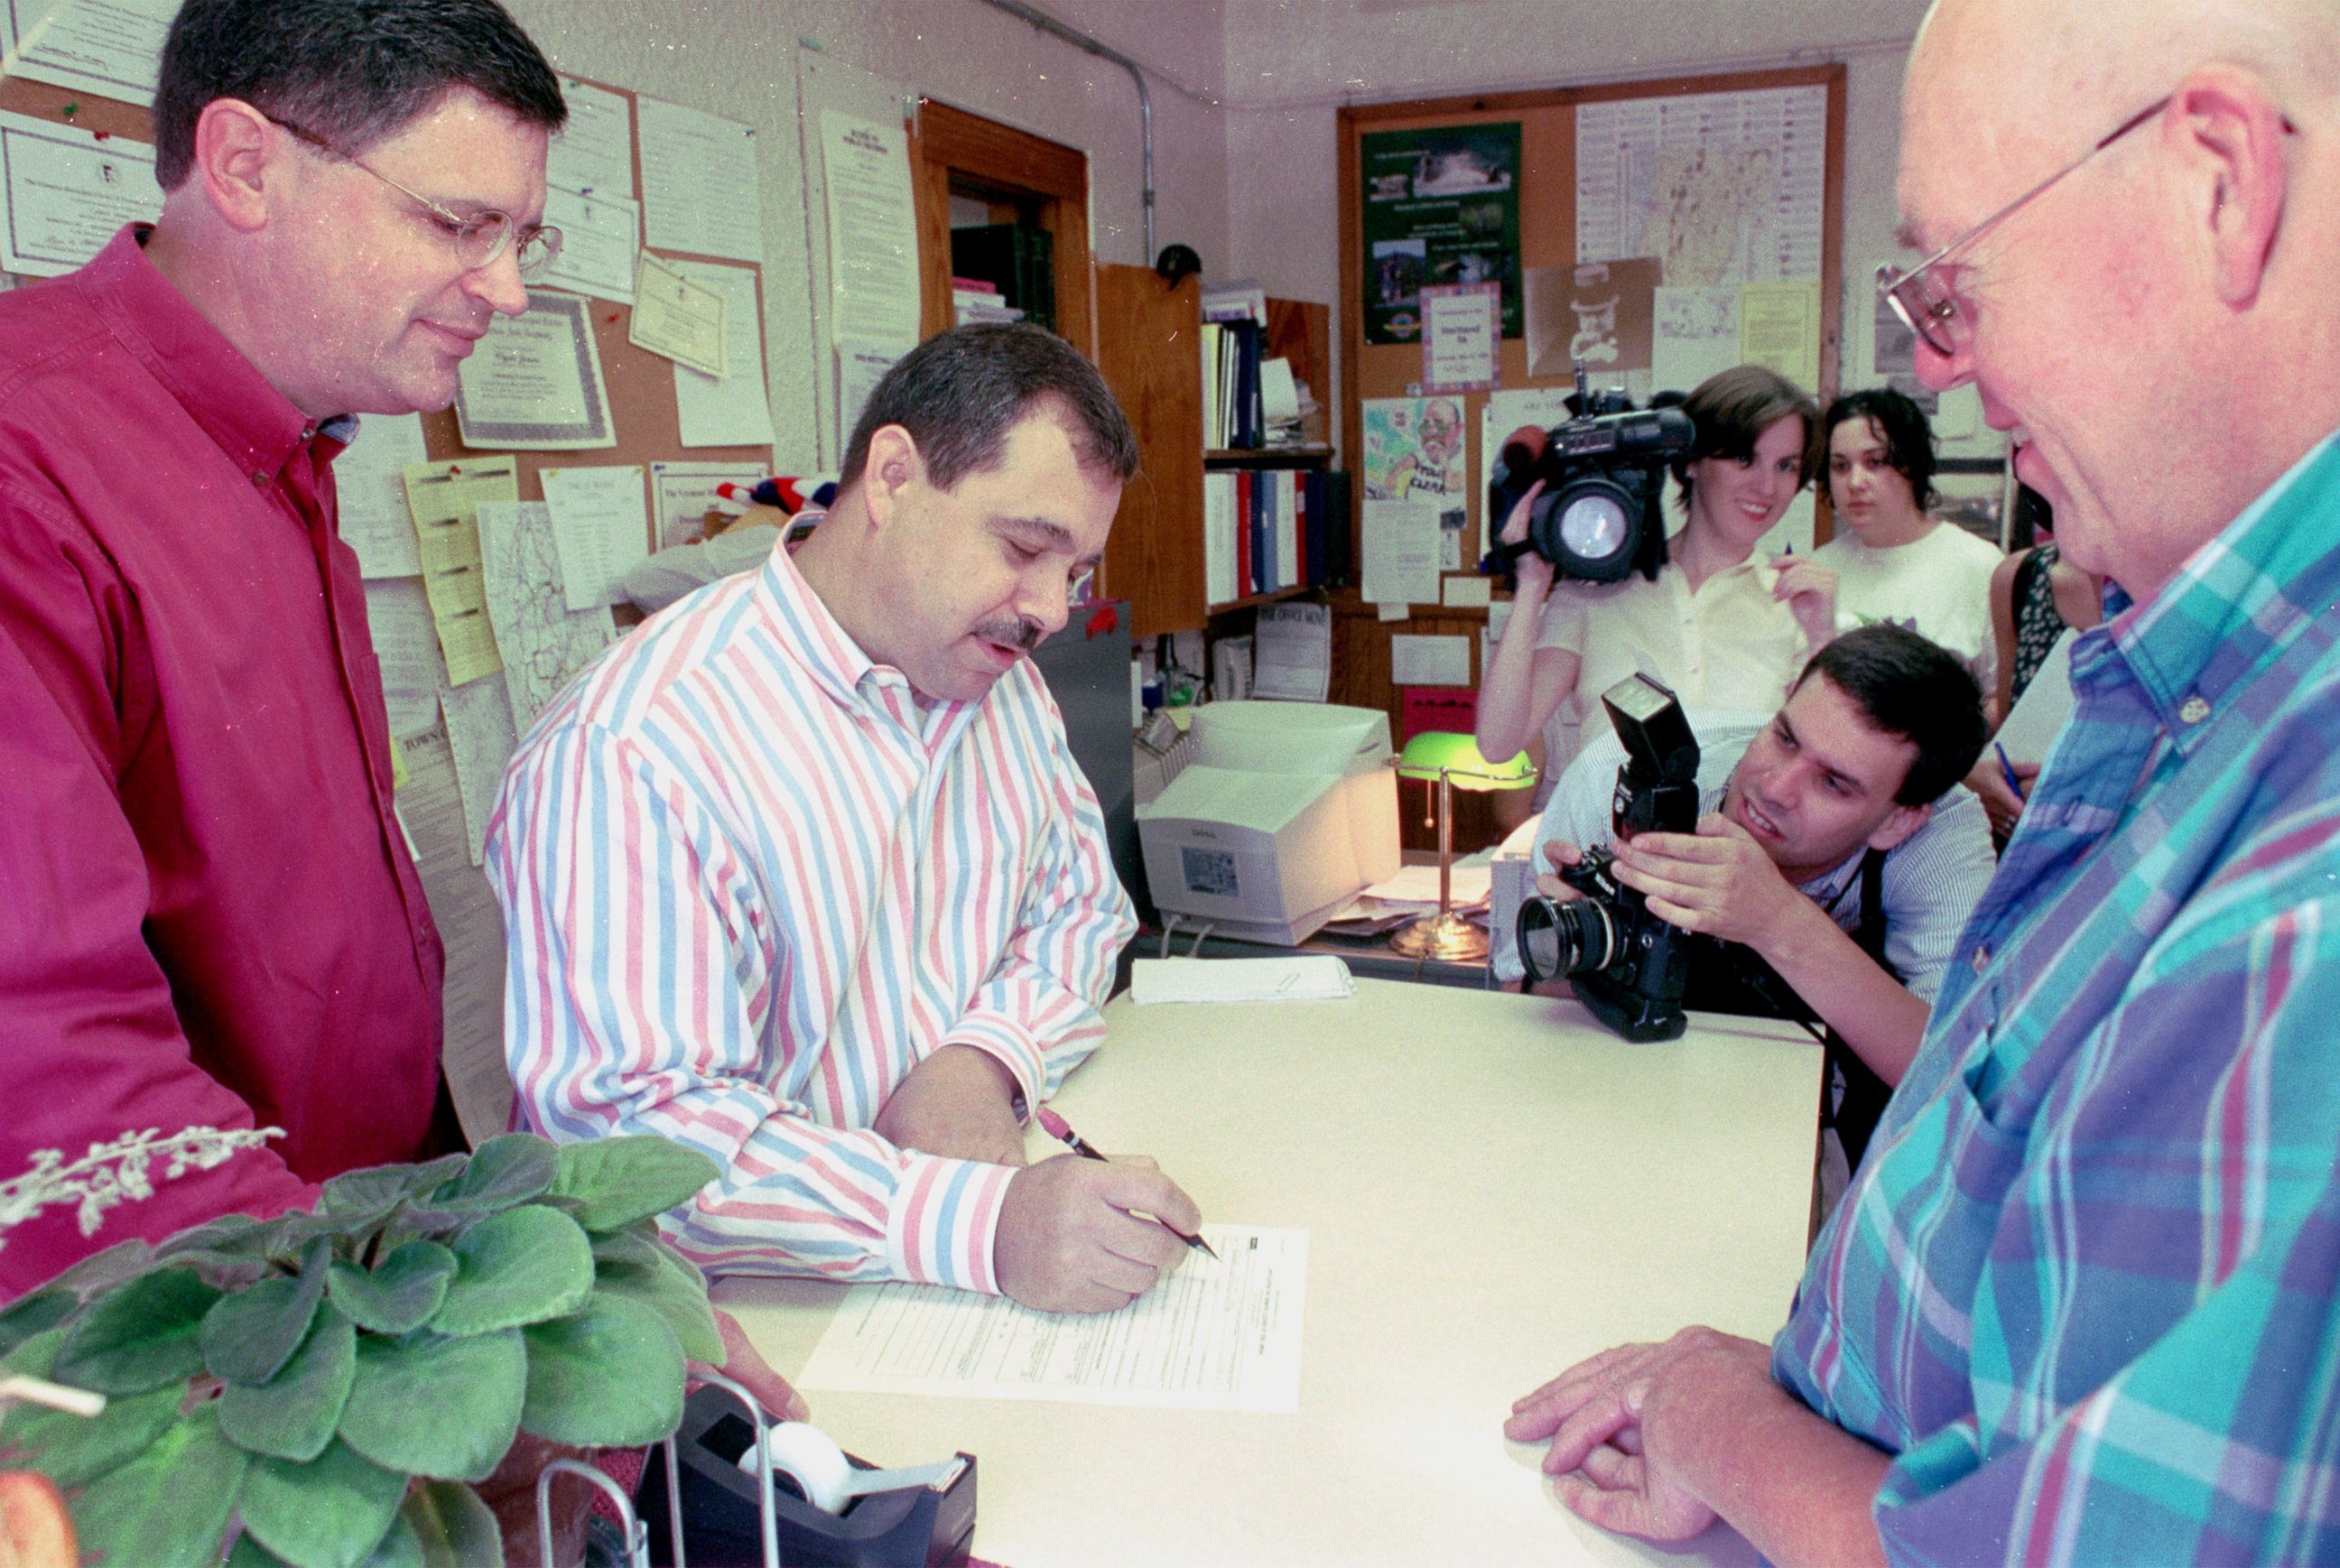 PHOTO: Joe Skirchak and Pat Cerra of Plainfield, N.H., fill out civil union paperwork with Hartland, Vt., town clerk Clyde Jenne on July 1, 2000.